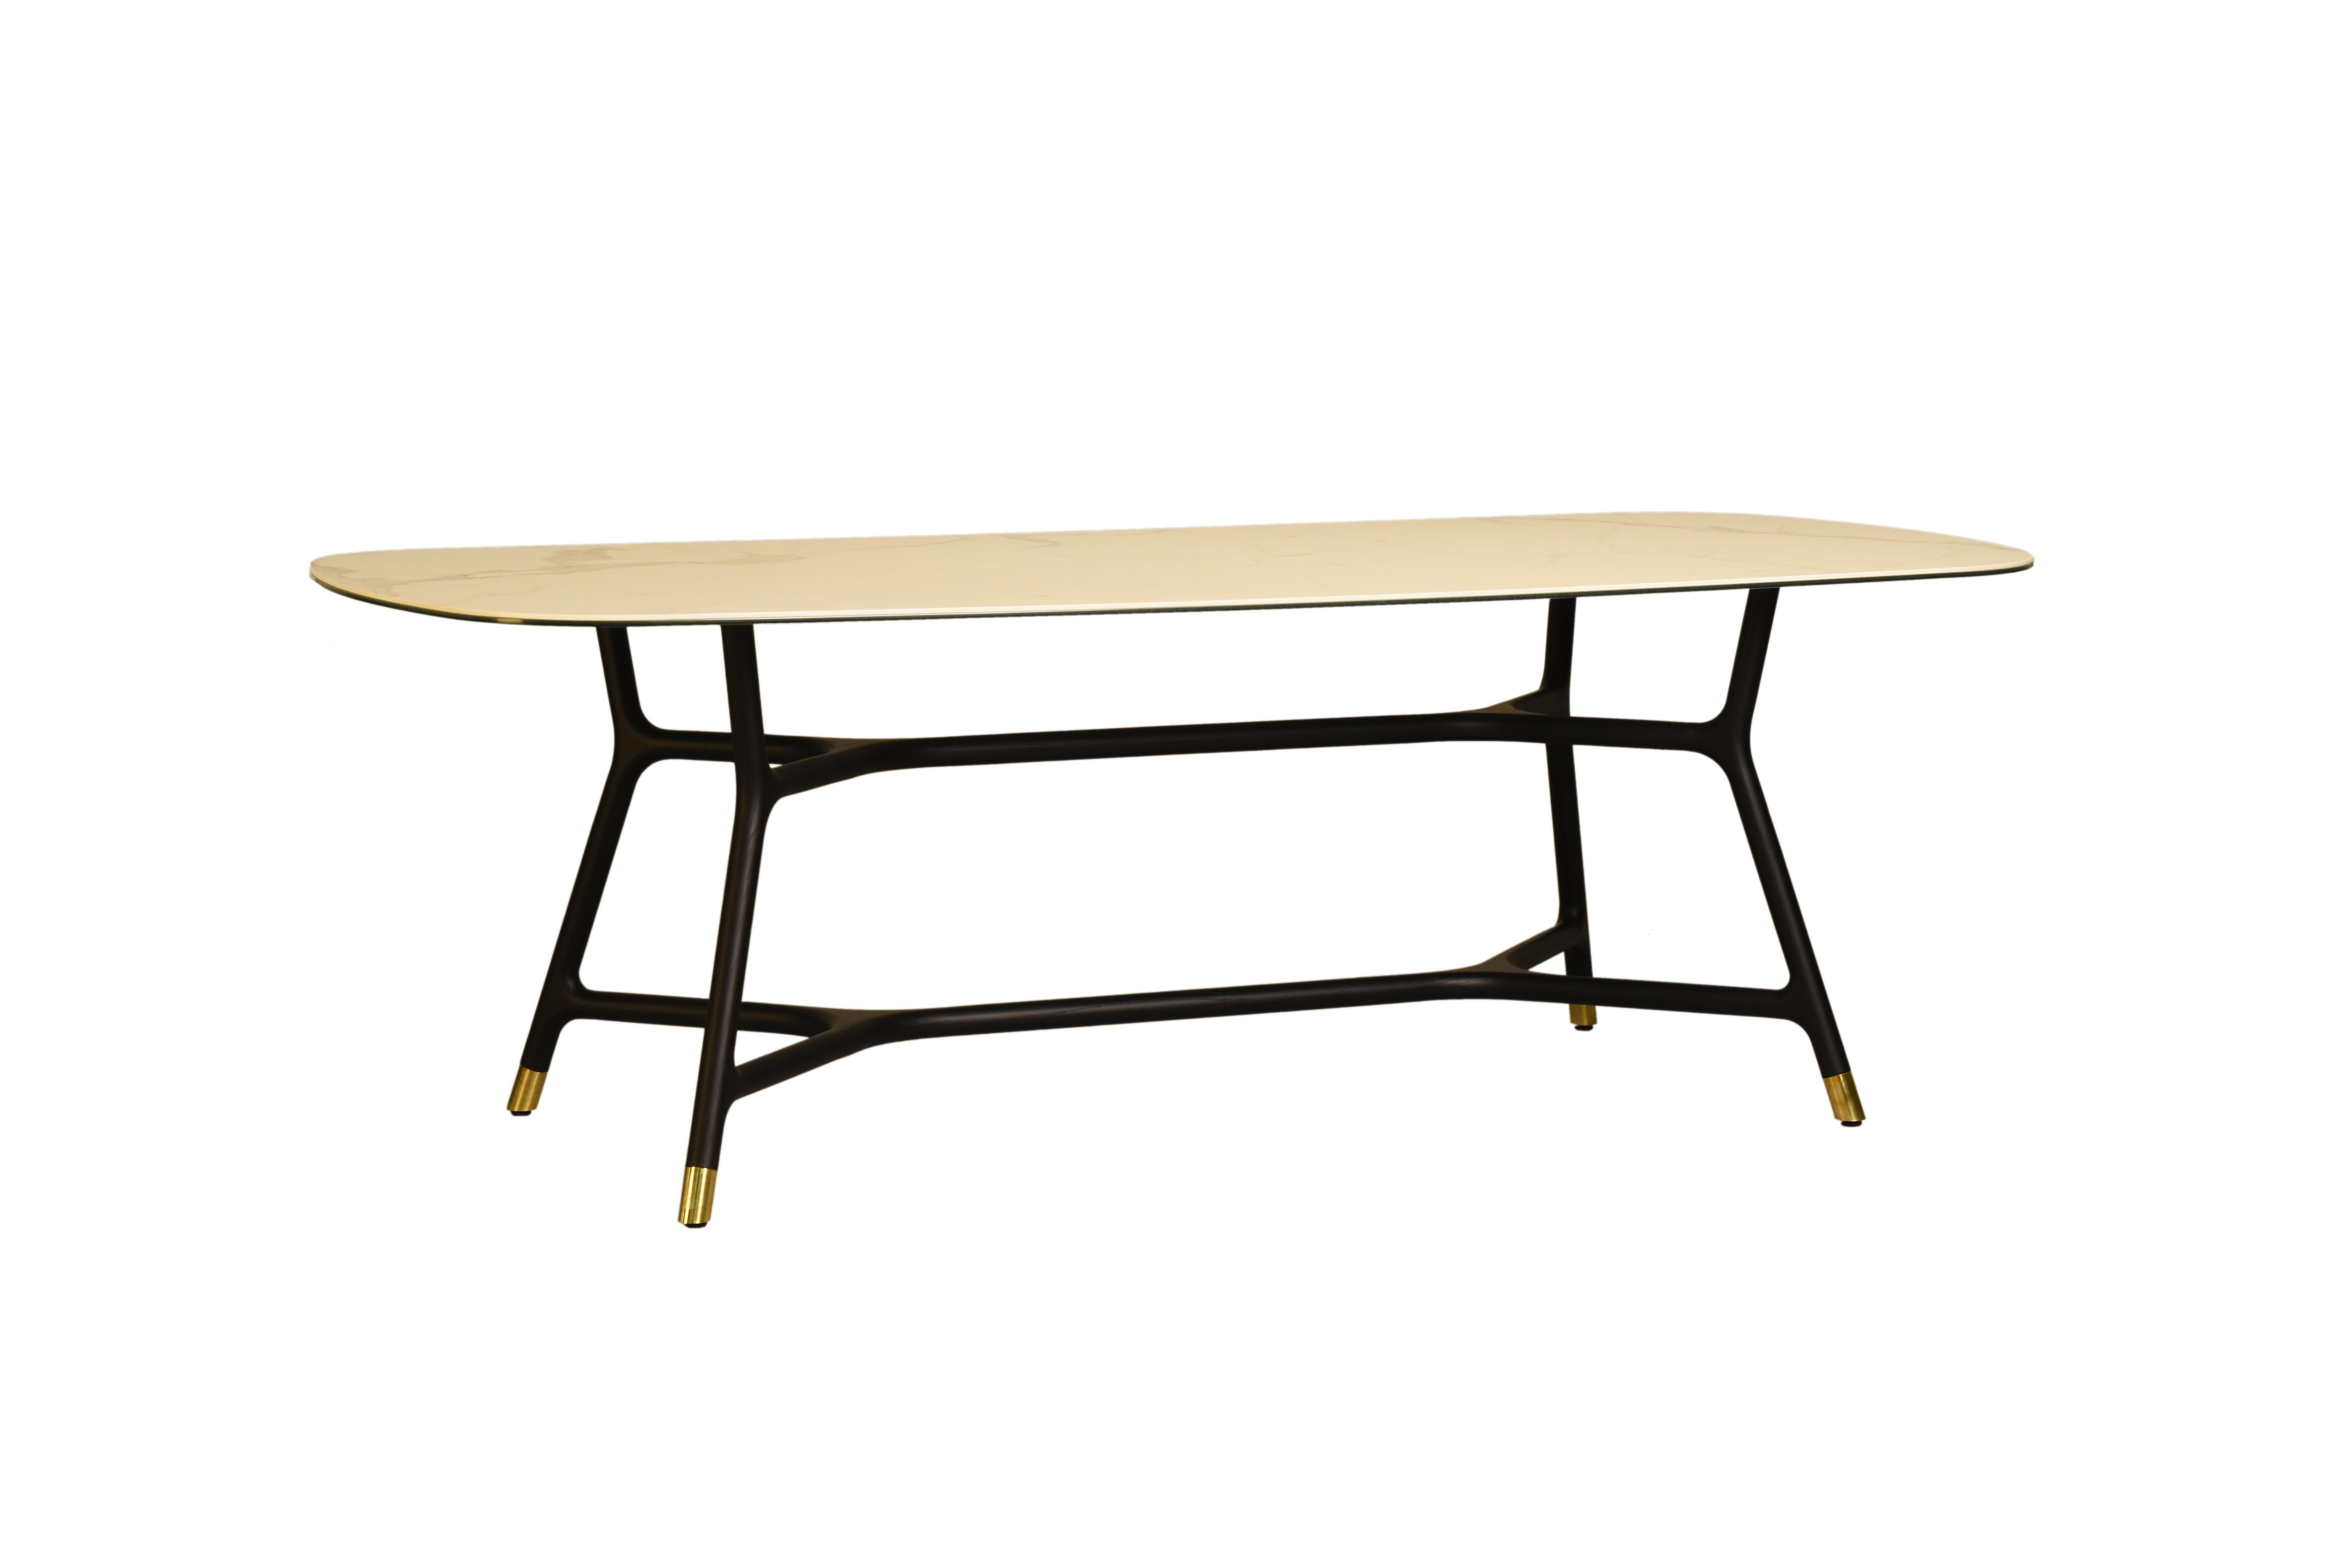 Dining contemporary table made of ashwood, handcrafted, with slim top made of glass and 6mm marble 
Customizable in: wood finish, marble type, dimension.
Made in Italy by Morelato